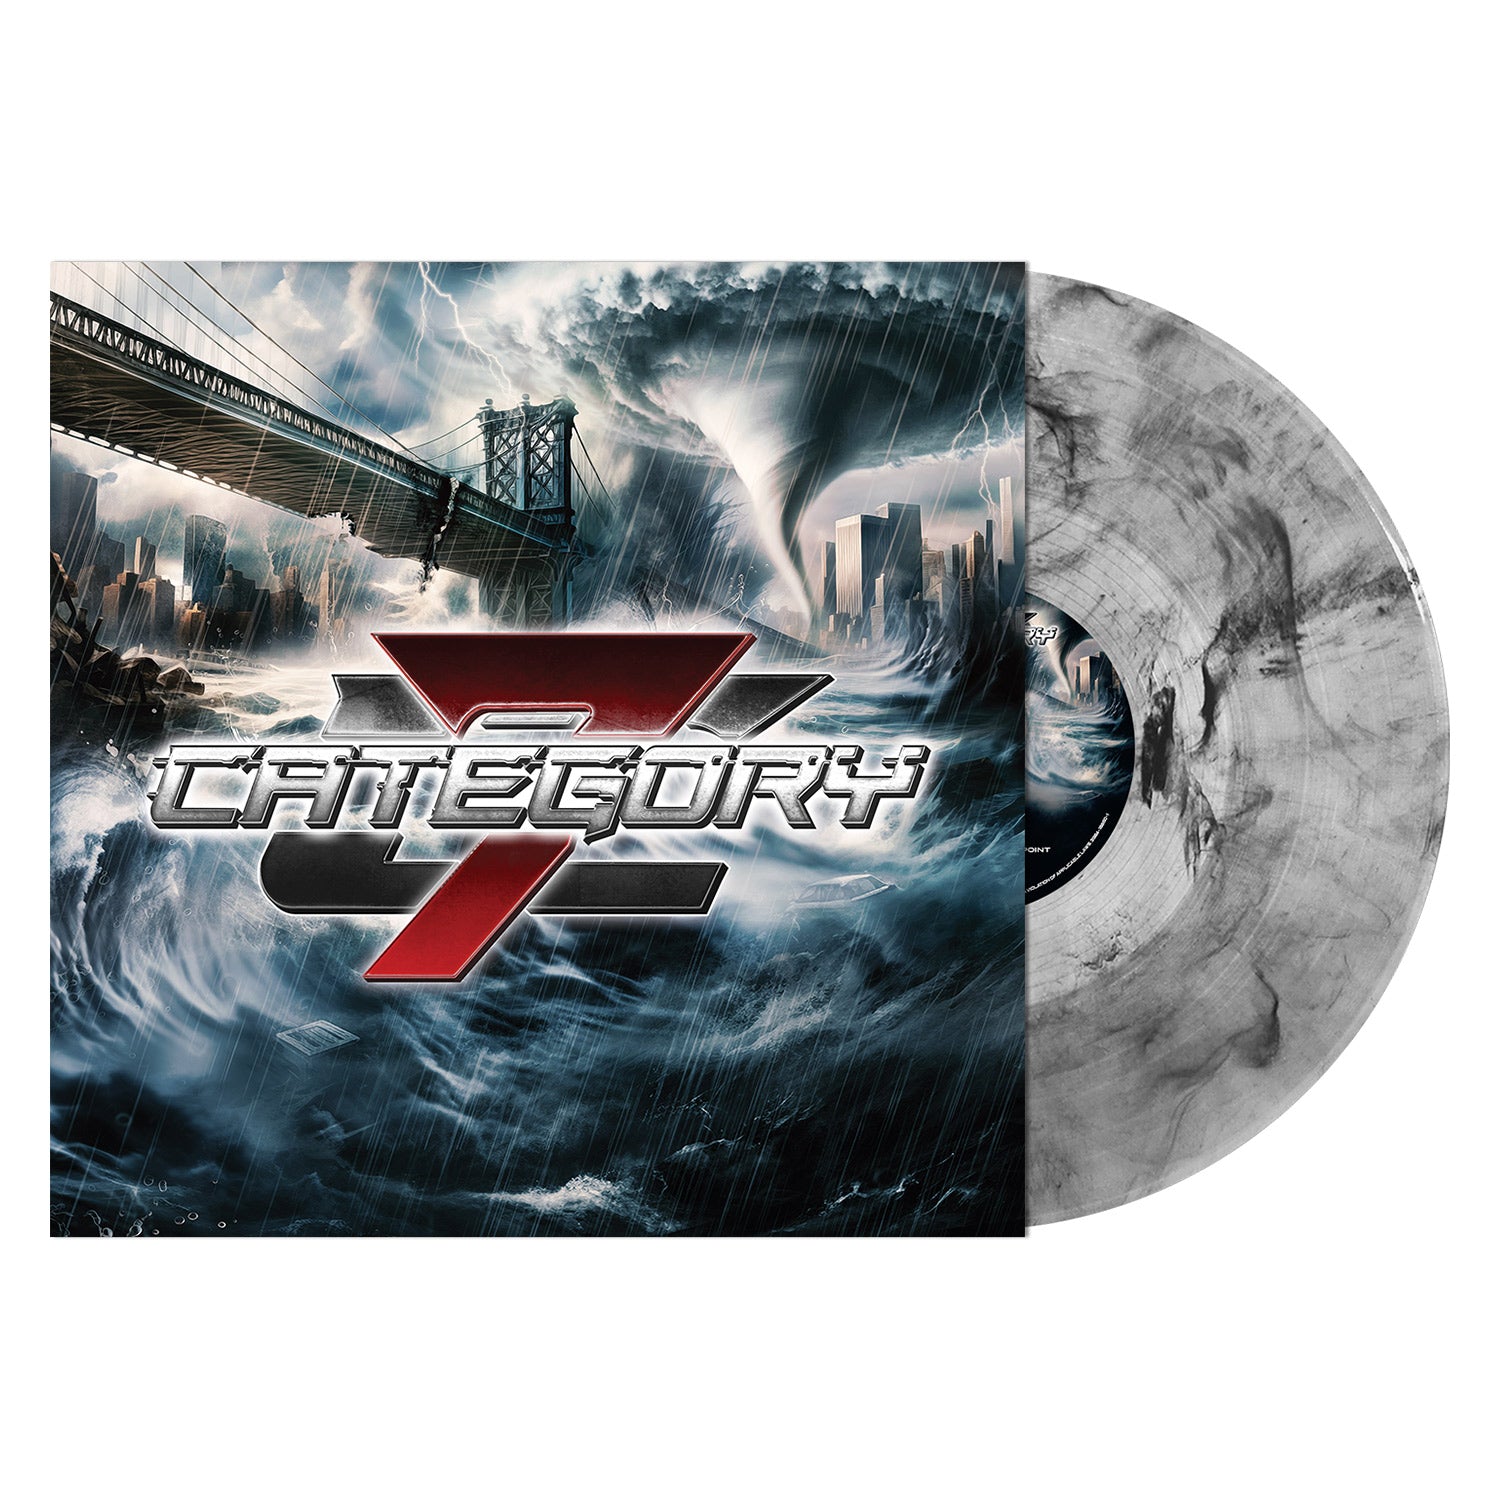 Category 7 "Category 7" 'Sable Smoke' Vinyl (Ltd to 300 copies) - PRE-ORDER